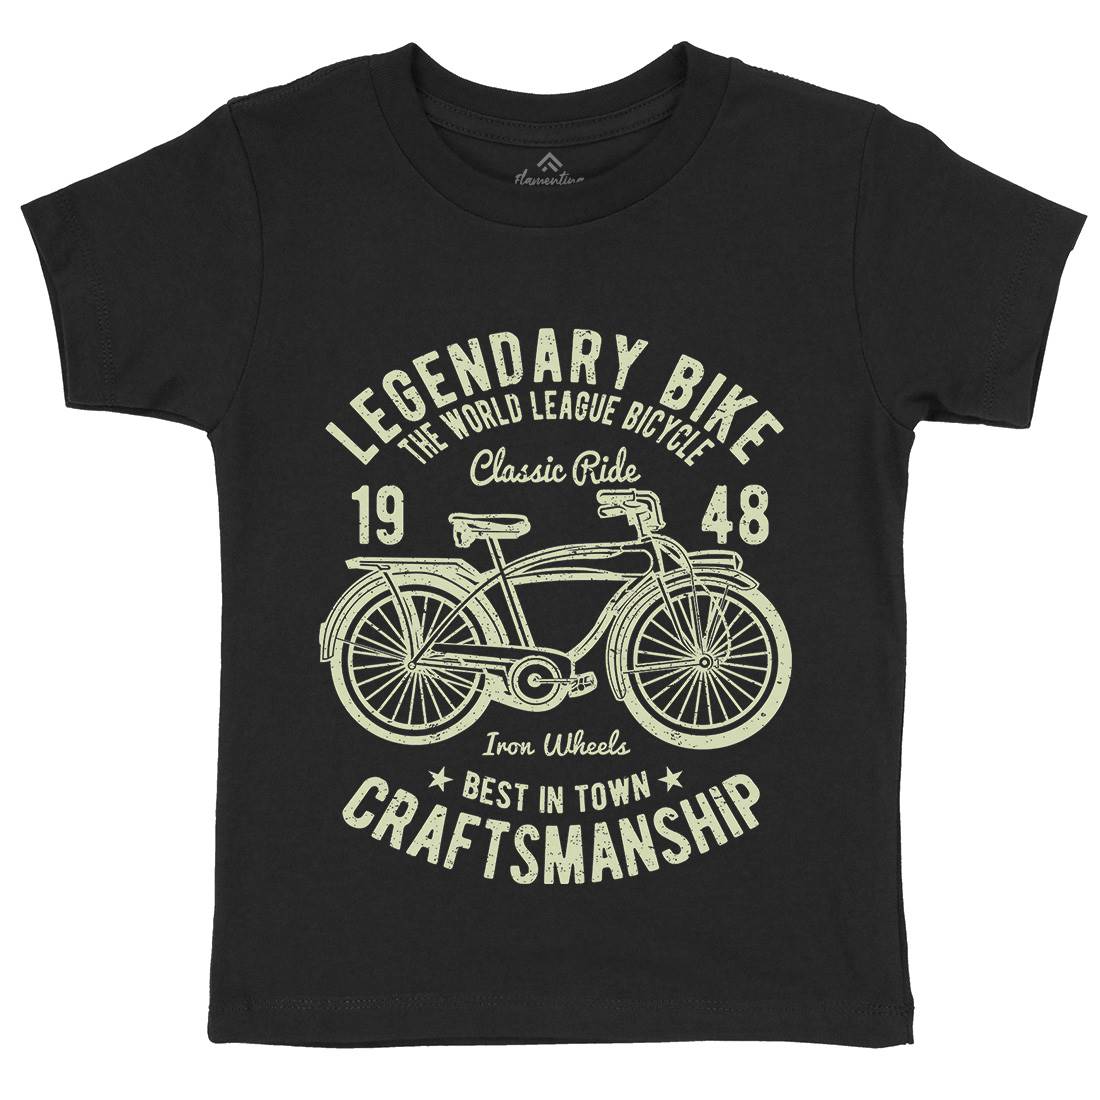 Classic Bicycle Kids Crew Neck T-Shirt Bikes A035